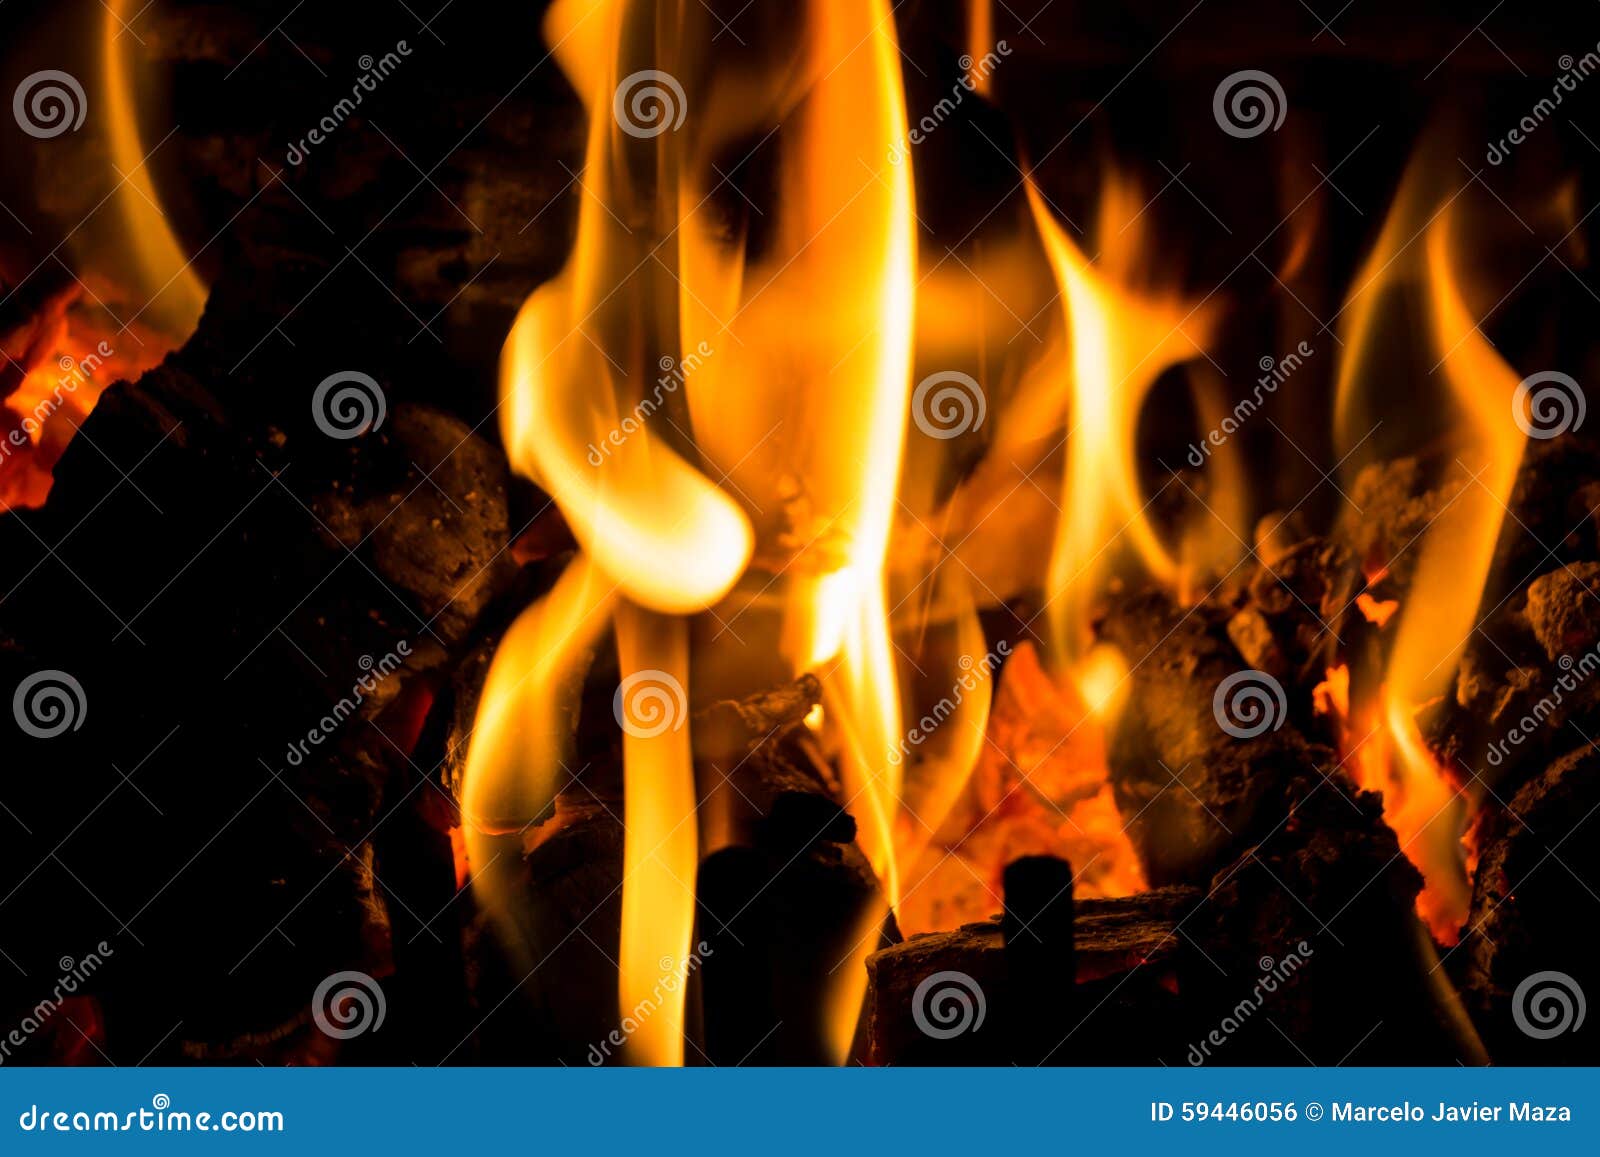 logs and coal on fire